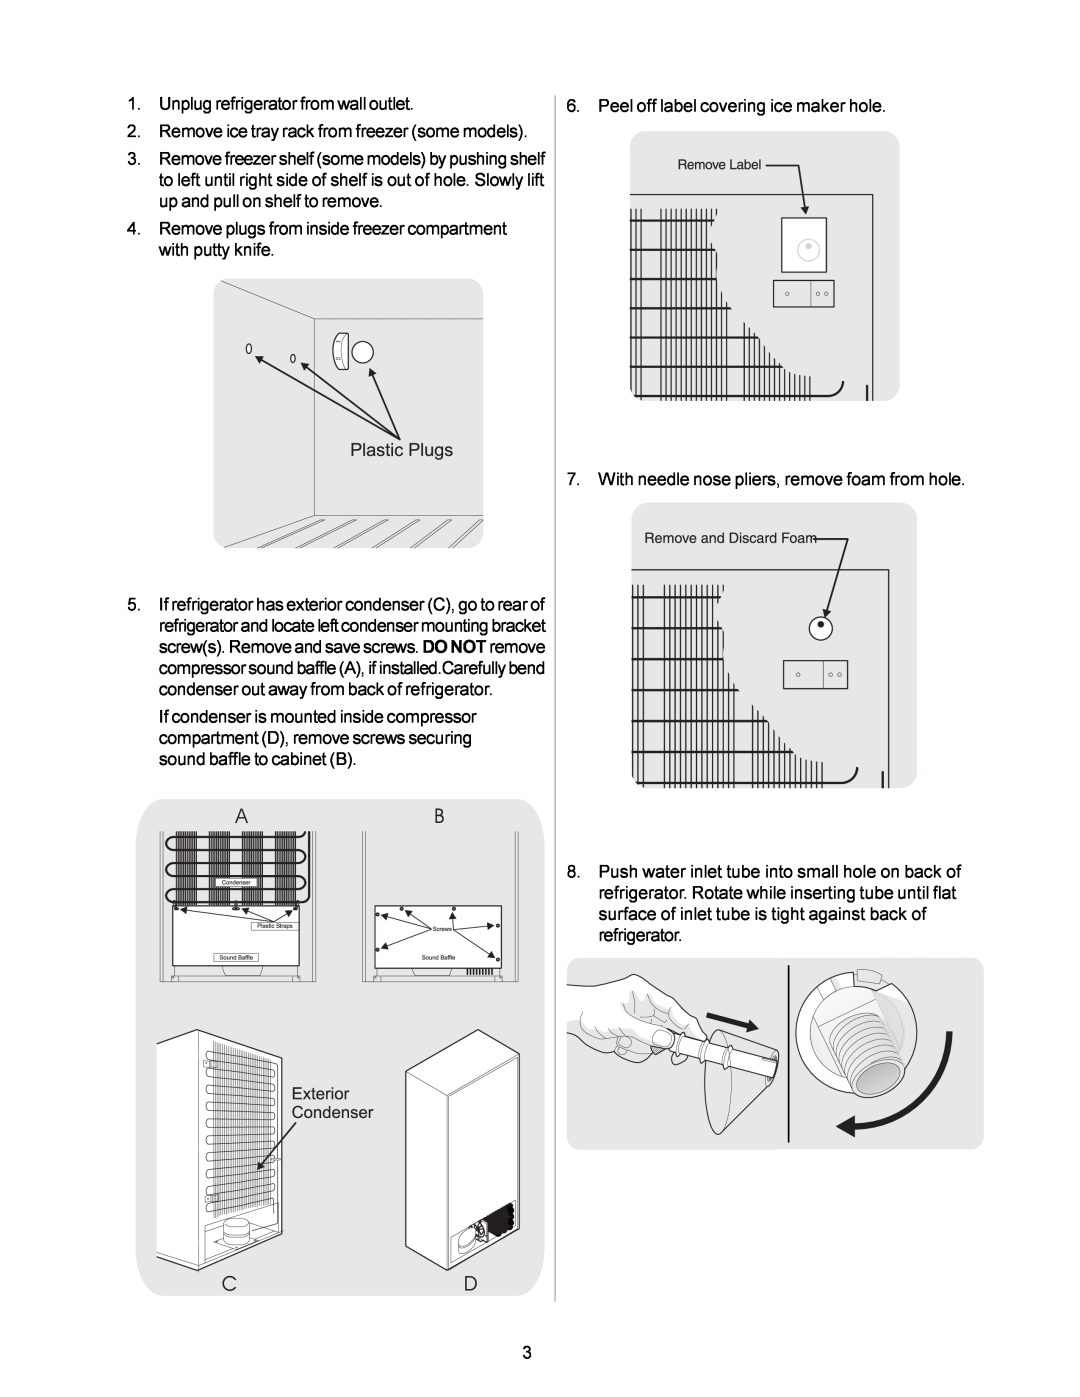 Frigidaire IM115 installation instructions Unplug refrigerator from wall outlet 